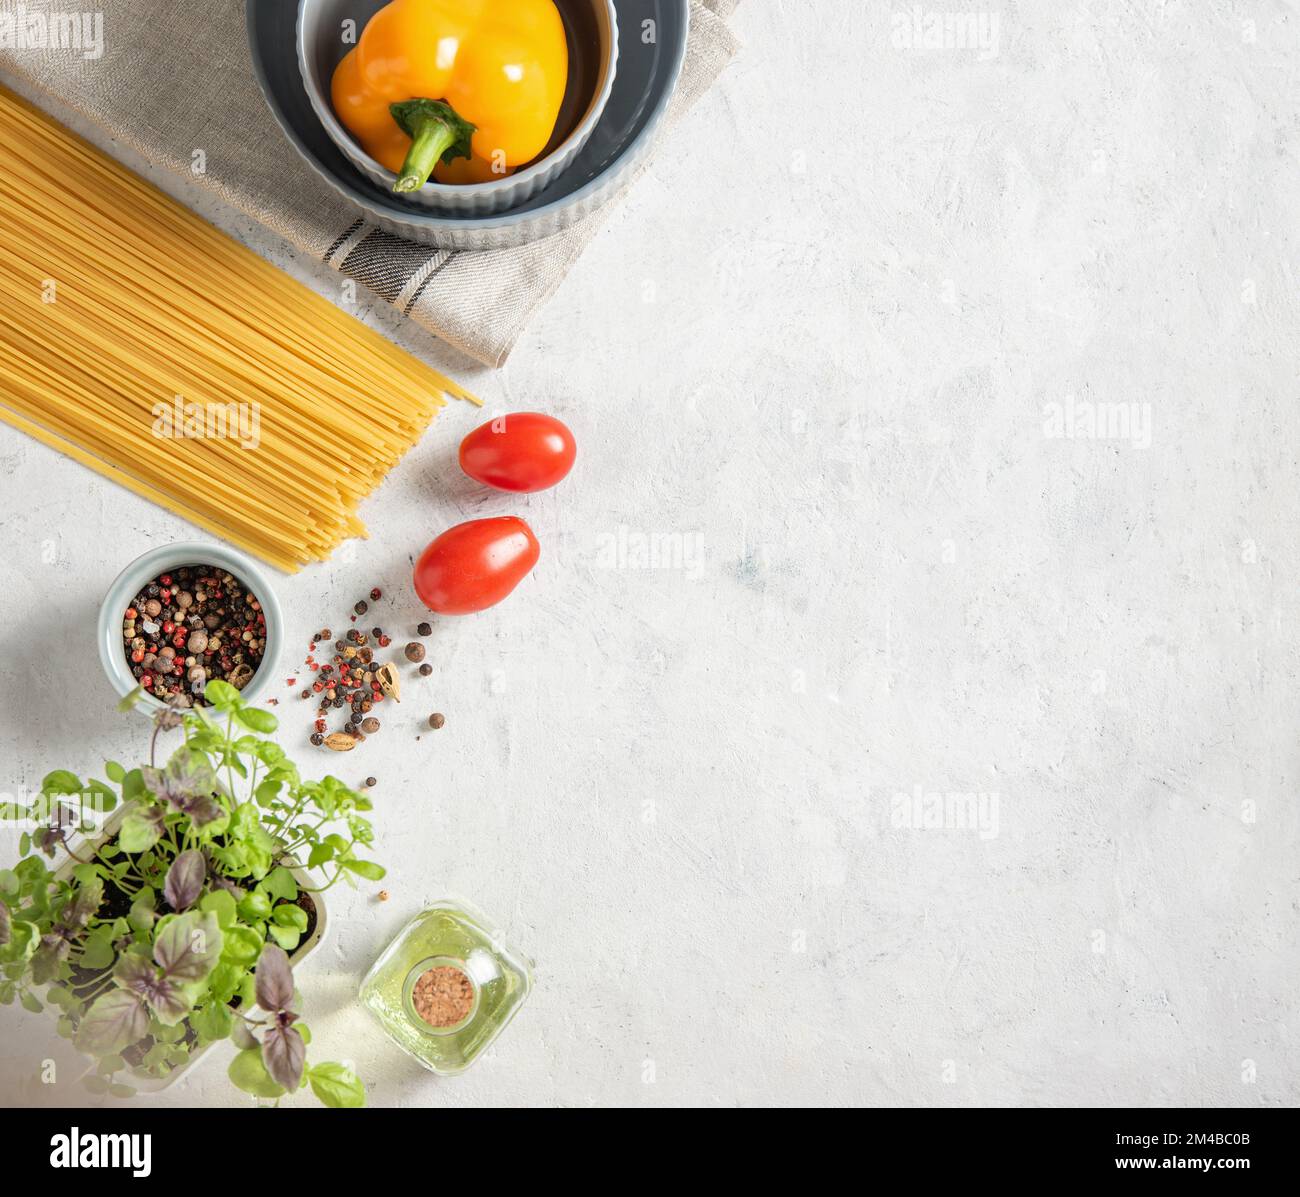 Consept flat lay with raw spaghetti with tomatoes, basil, pepper and olive oil on a white brick background. Traditional ingredients for making Italian Stock Photo